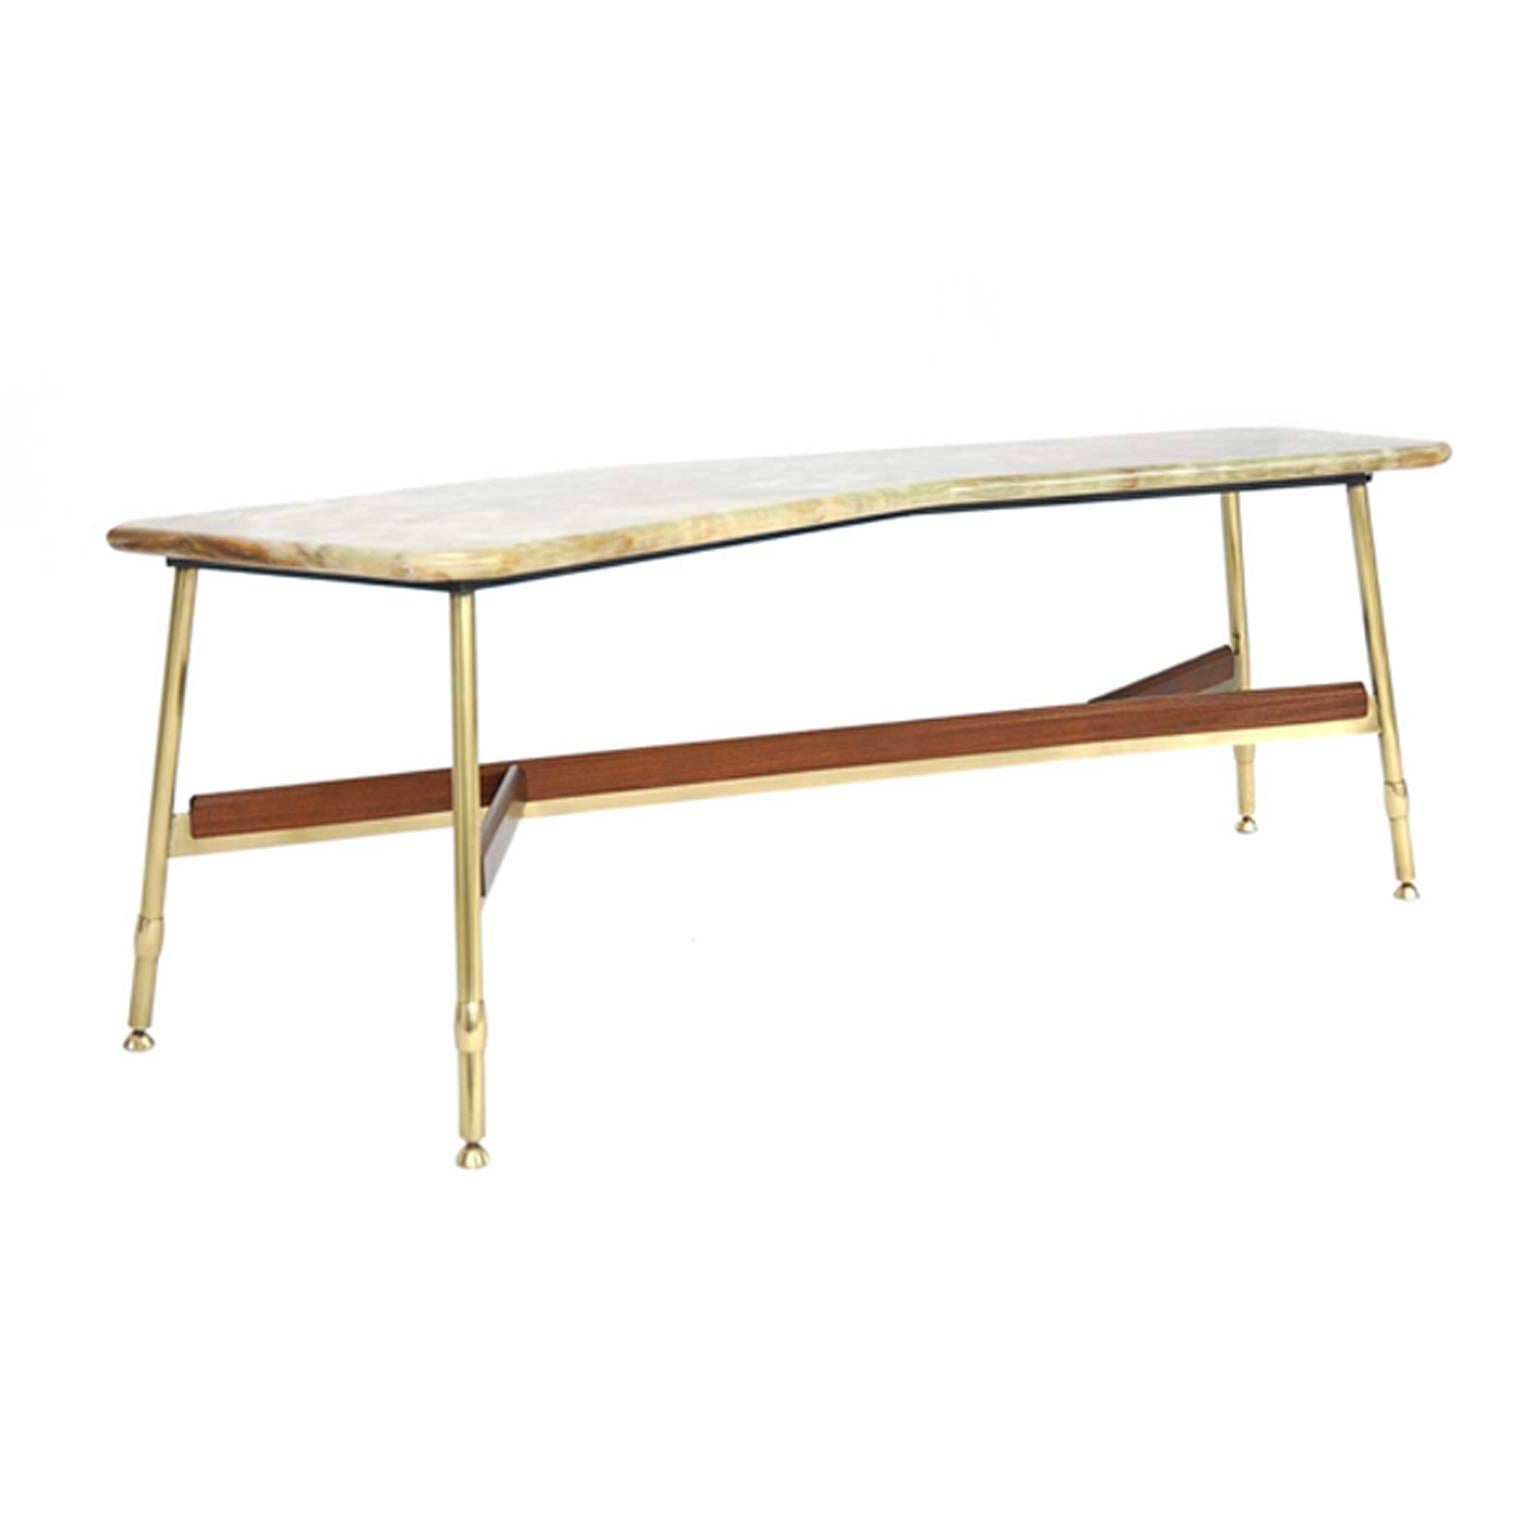 Mid-Century Modern Coffee Table with Onyx Tabletop Made in, Italy, 1950